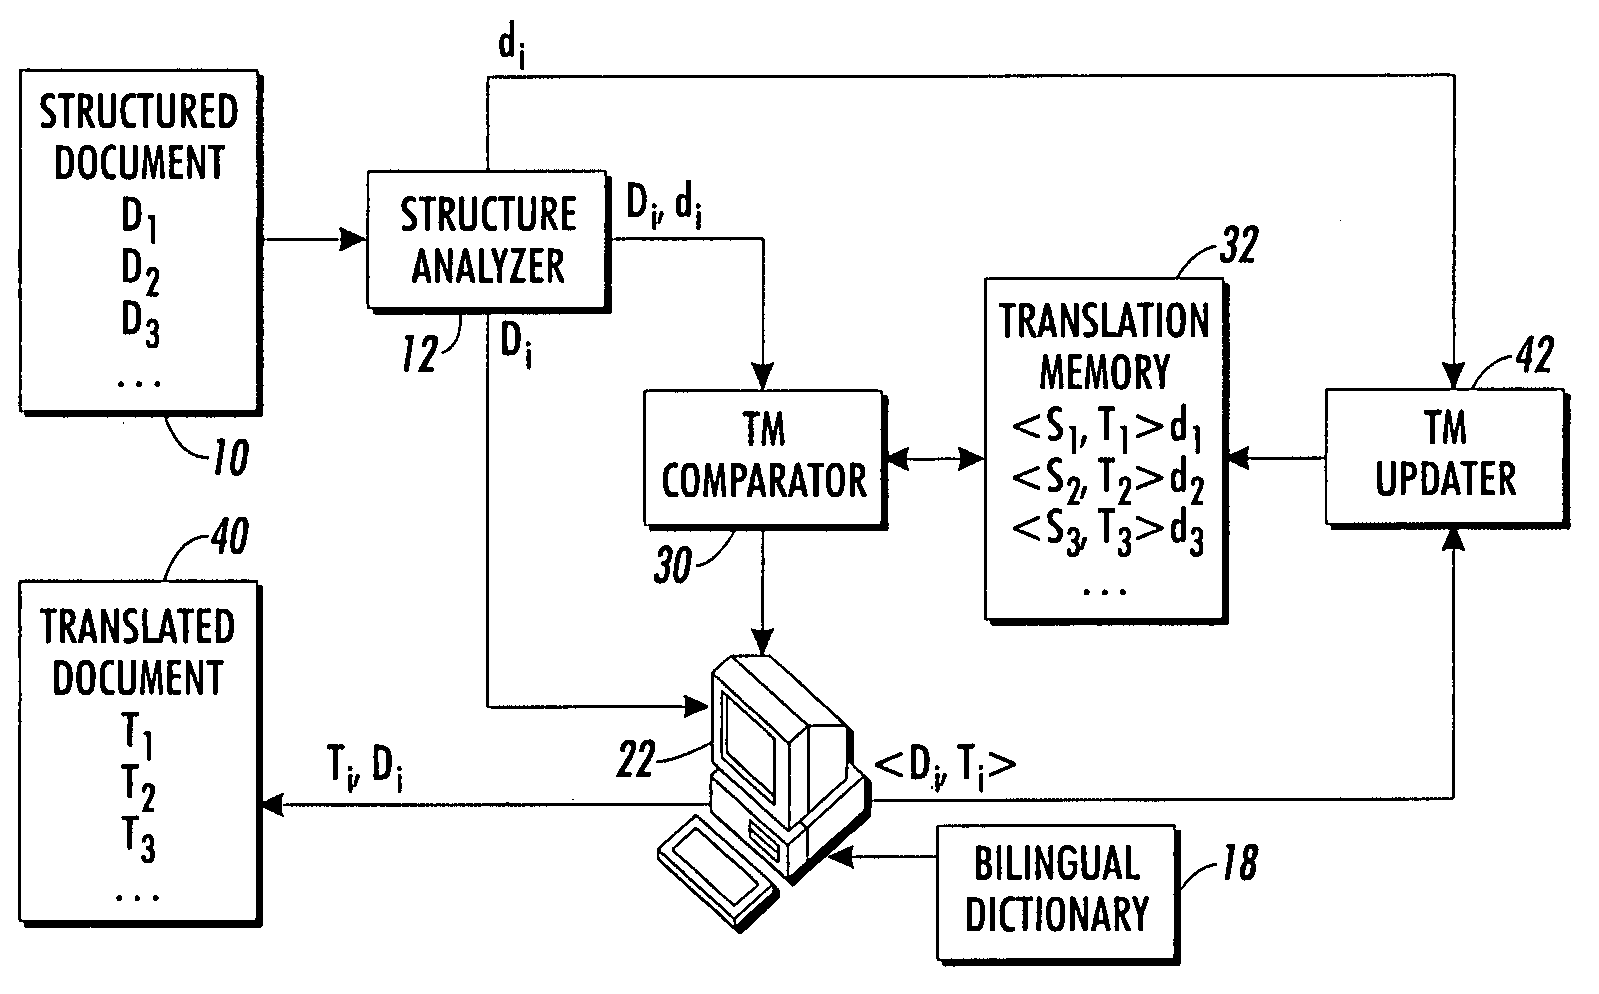 Retrieval method for translation memories containing highly structured documents